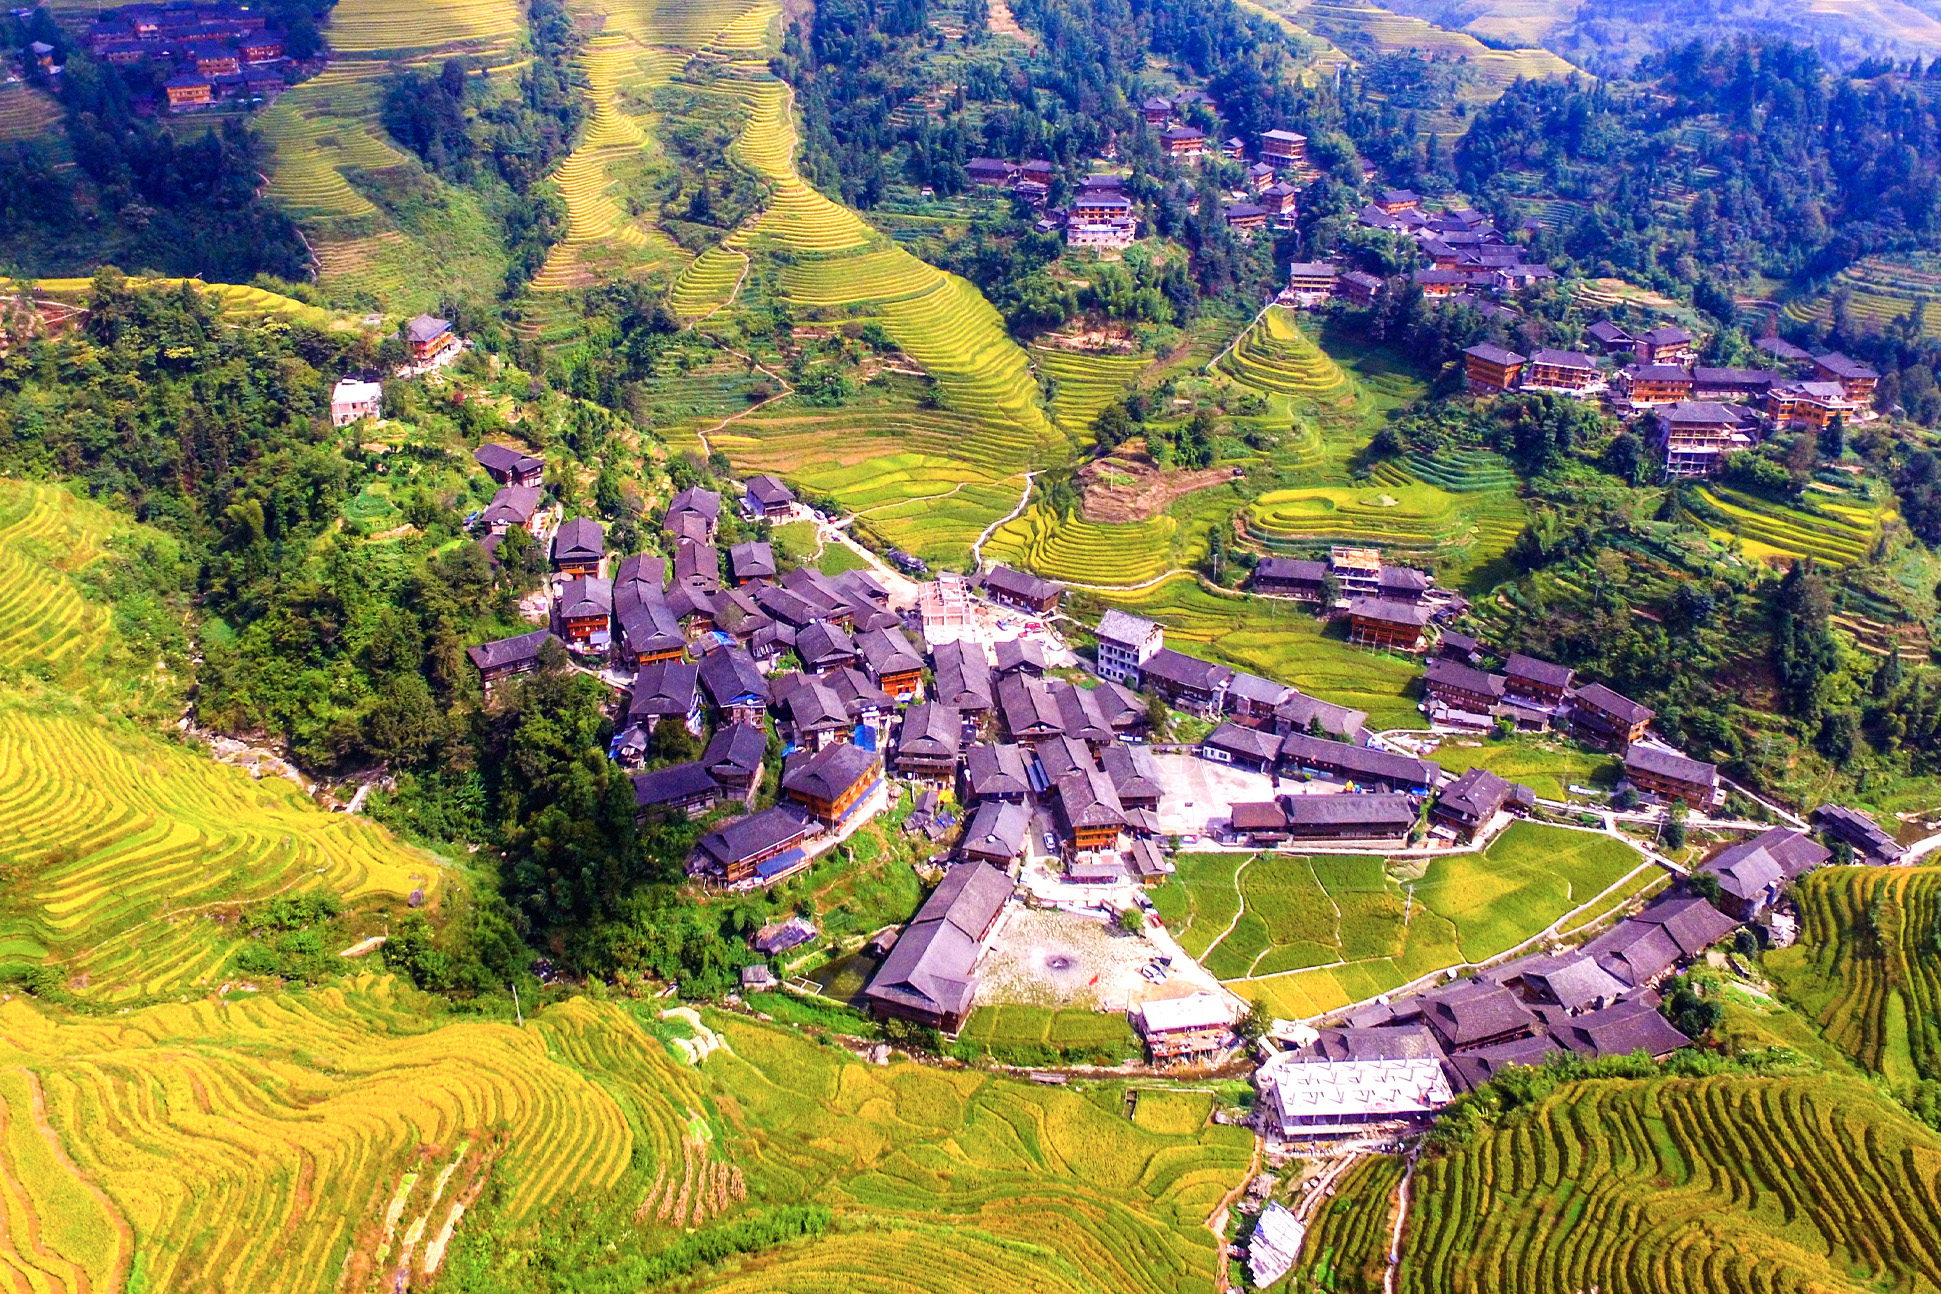 A mountain village surrounded by farming terraces.